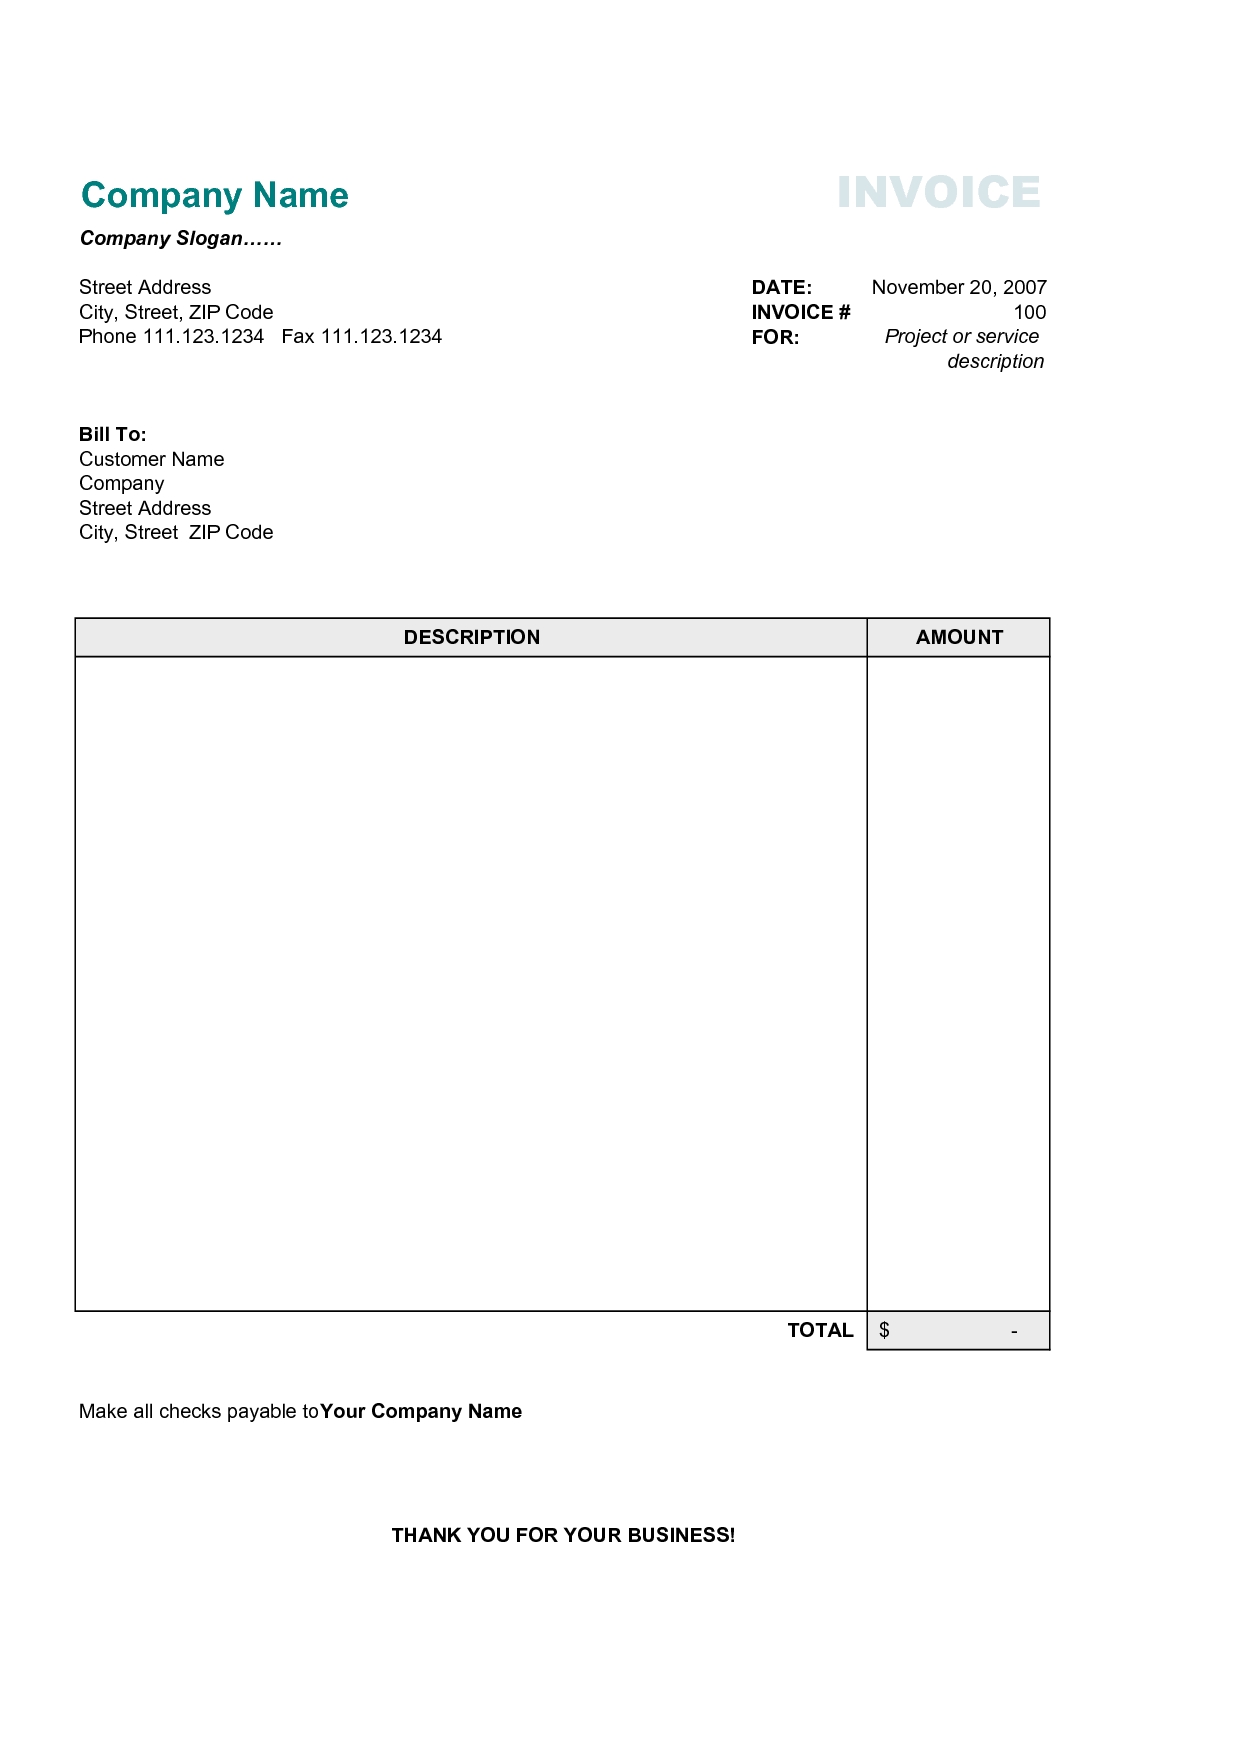 download invoice form free rabitah free invoice form template